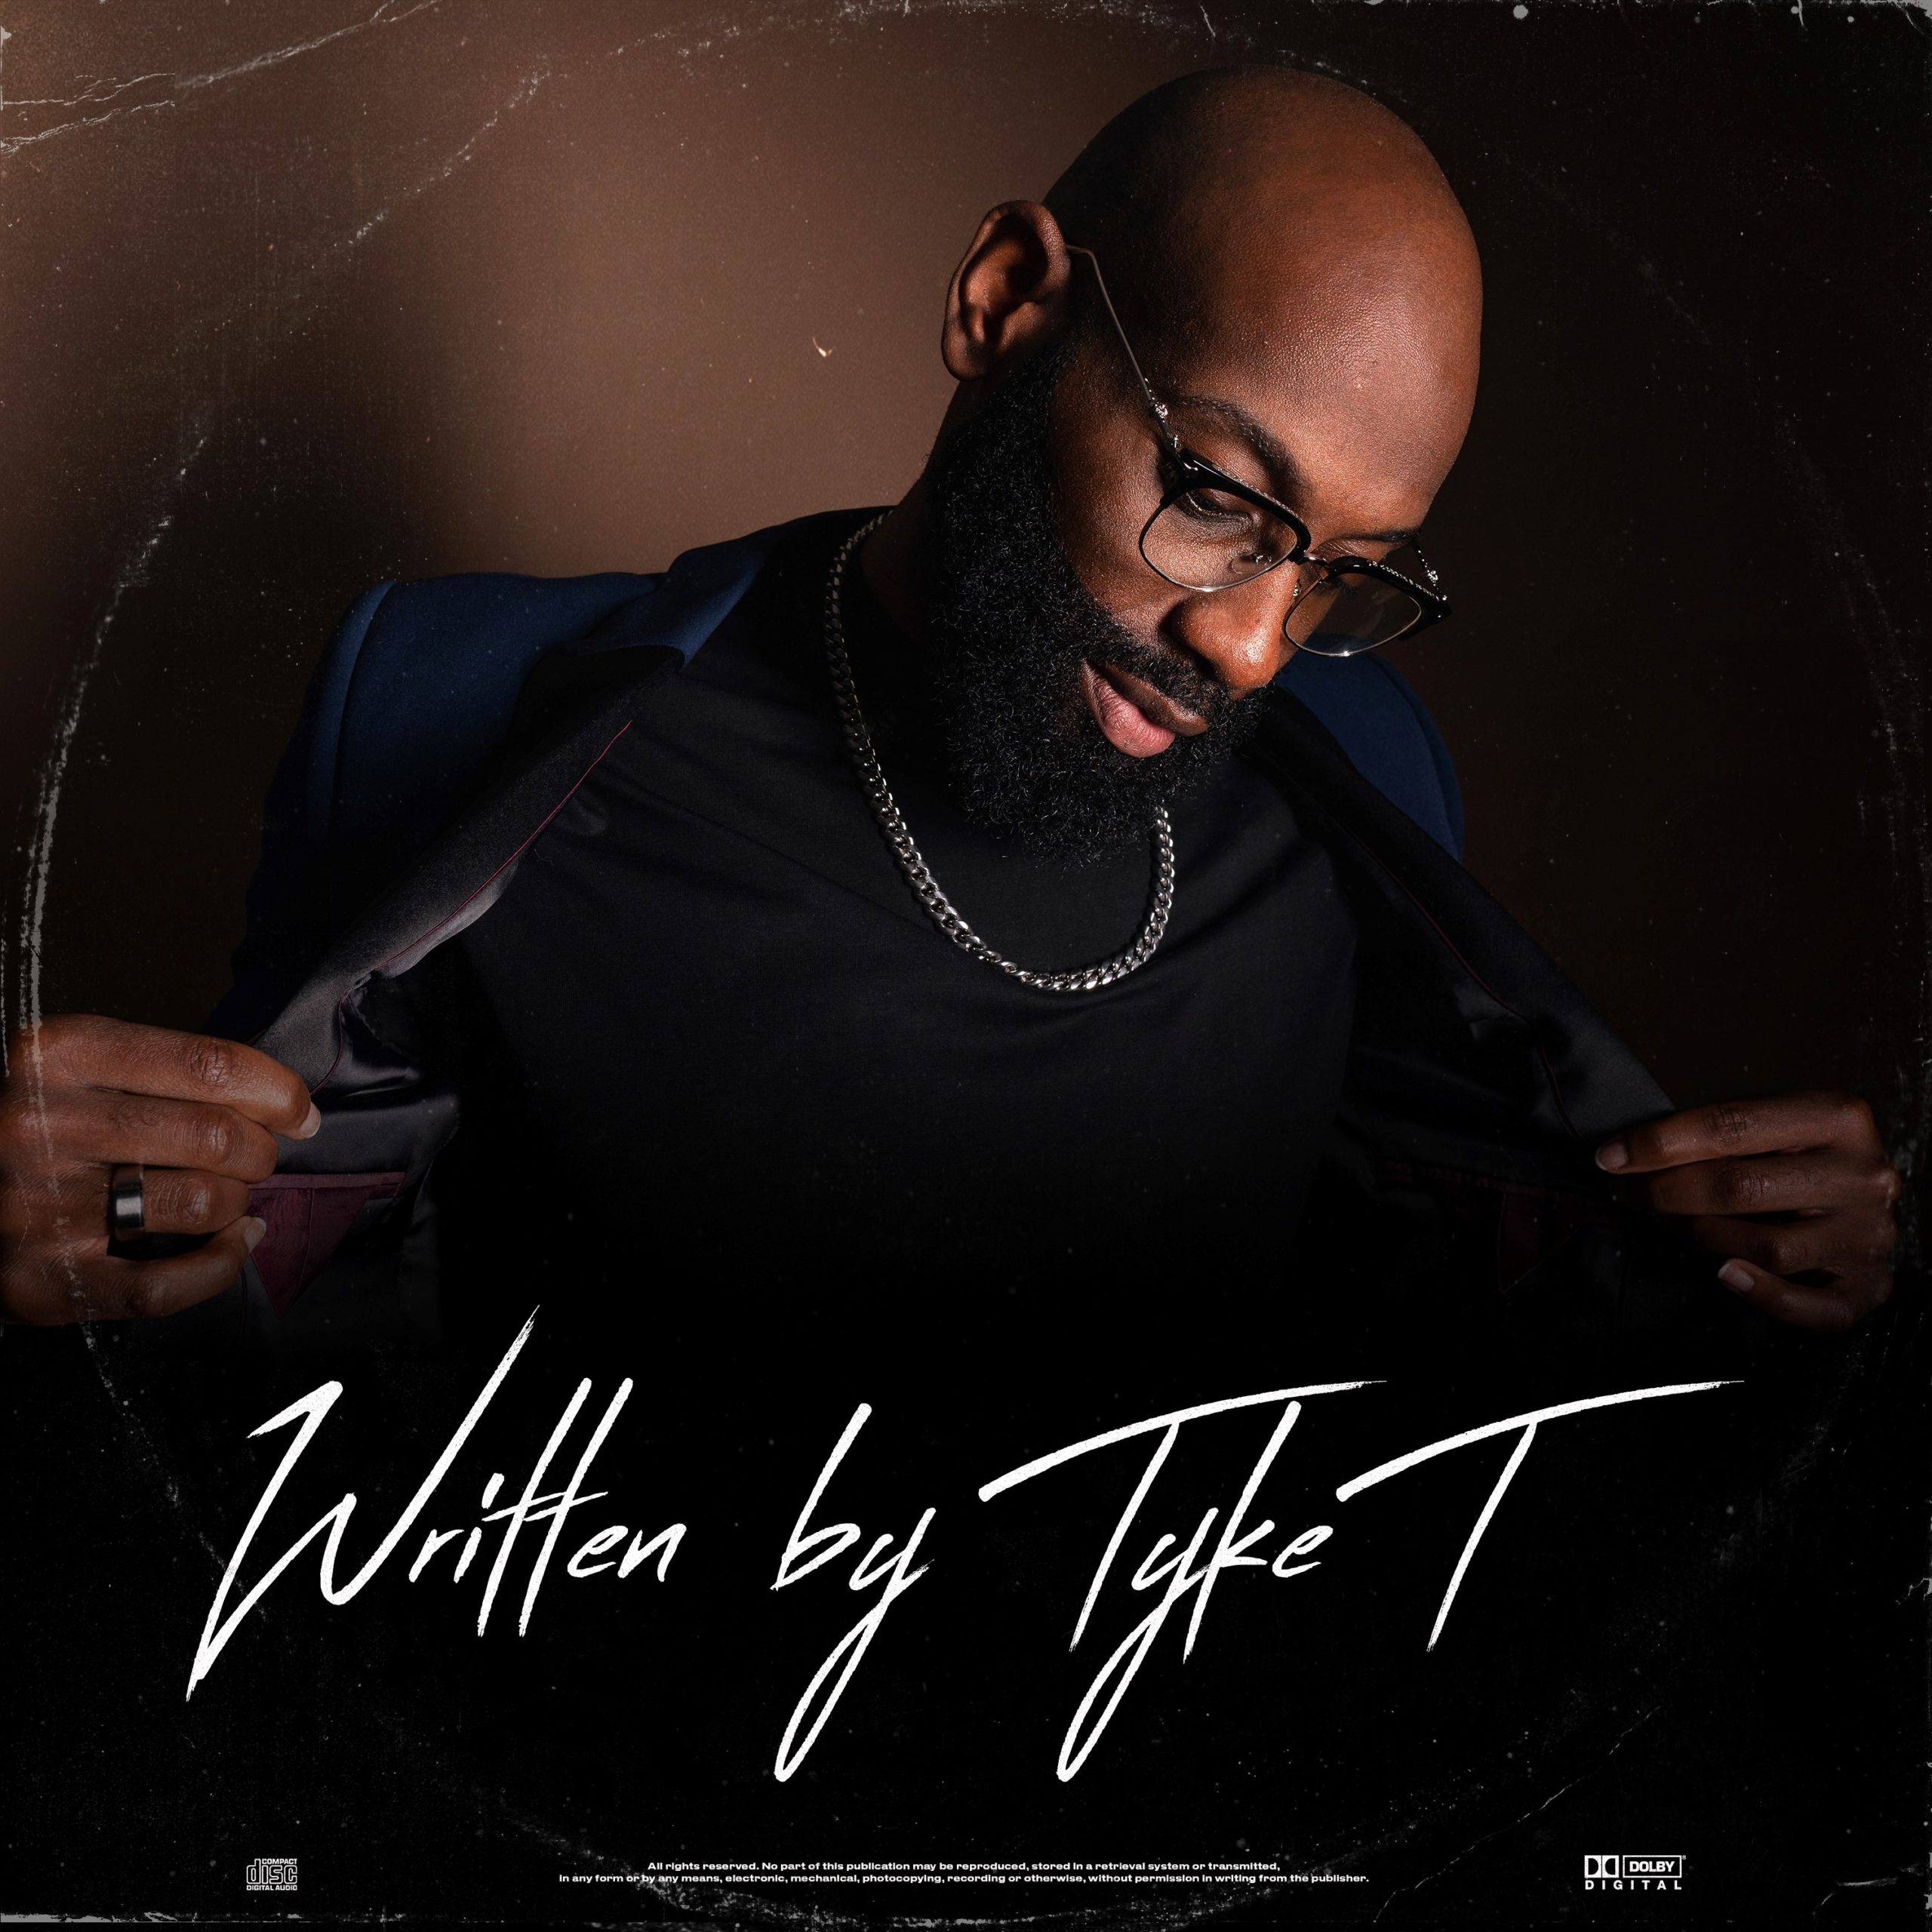 Tyke T drops new record, new direction with ‘Written by Tyke T’